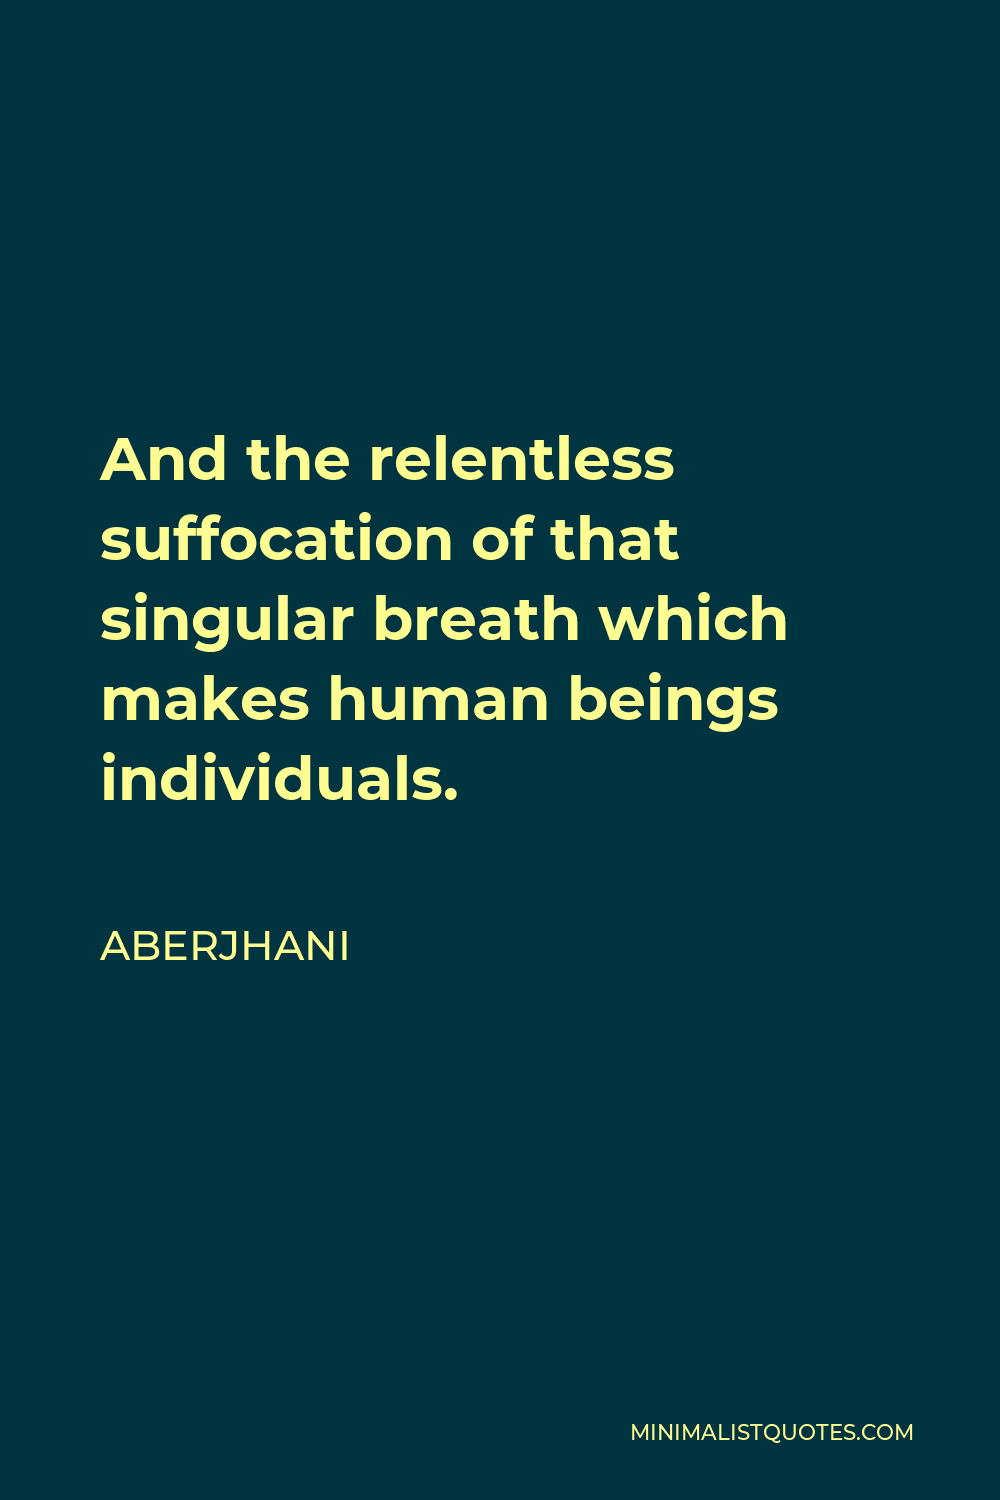 Aberjhani Quote - And the relentless suffocation of that singular breath which makes human beings individuals.